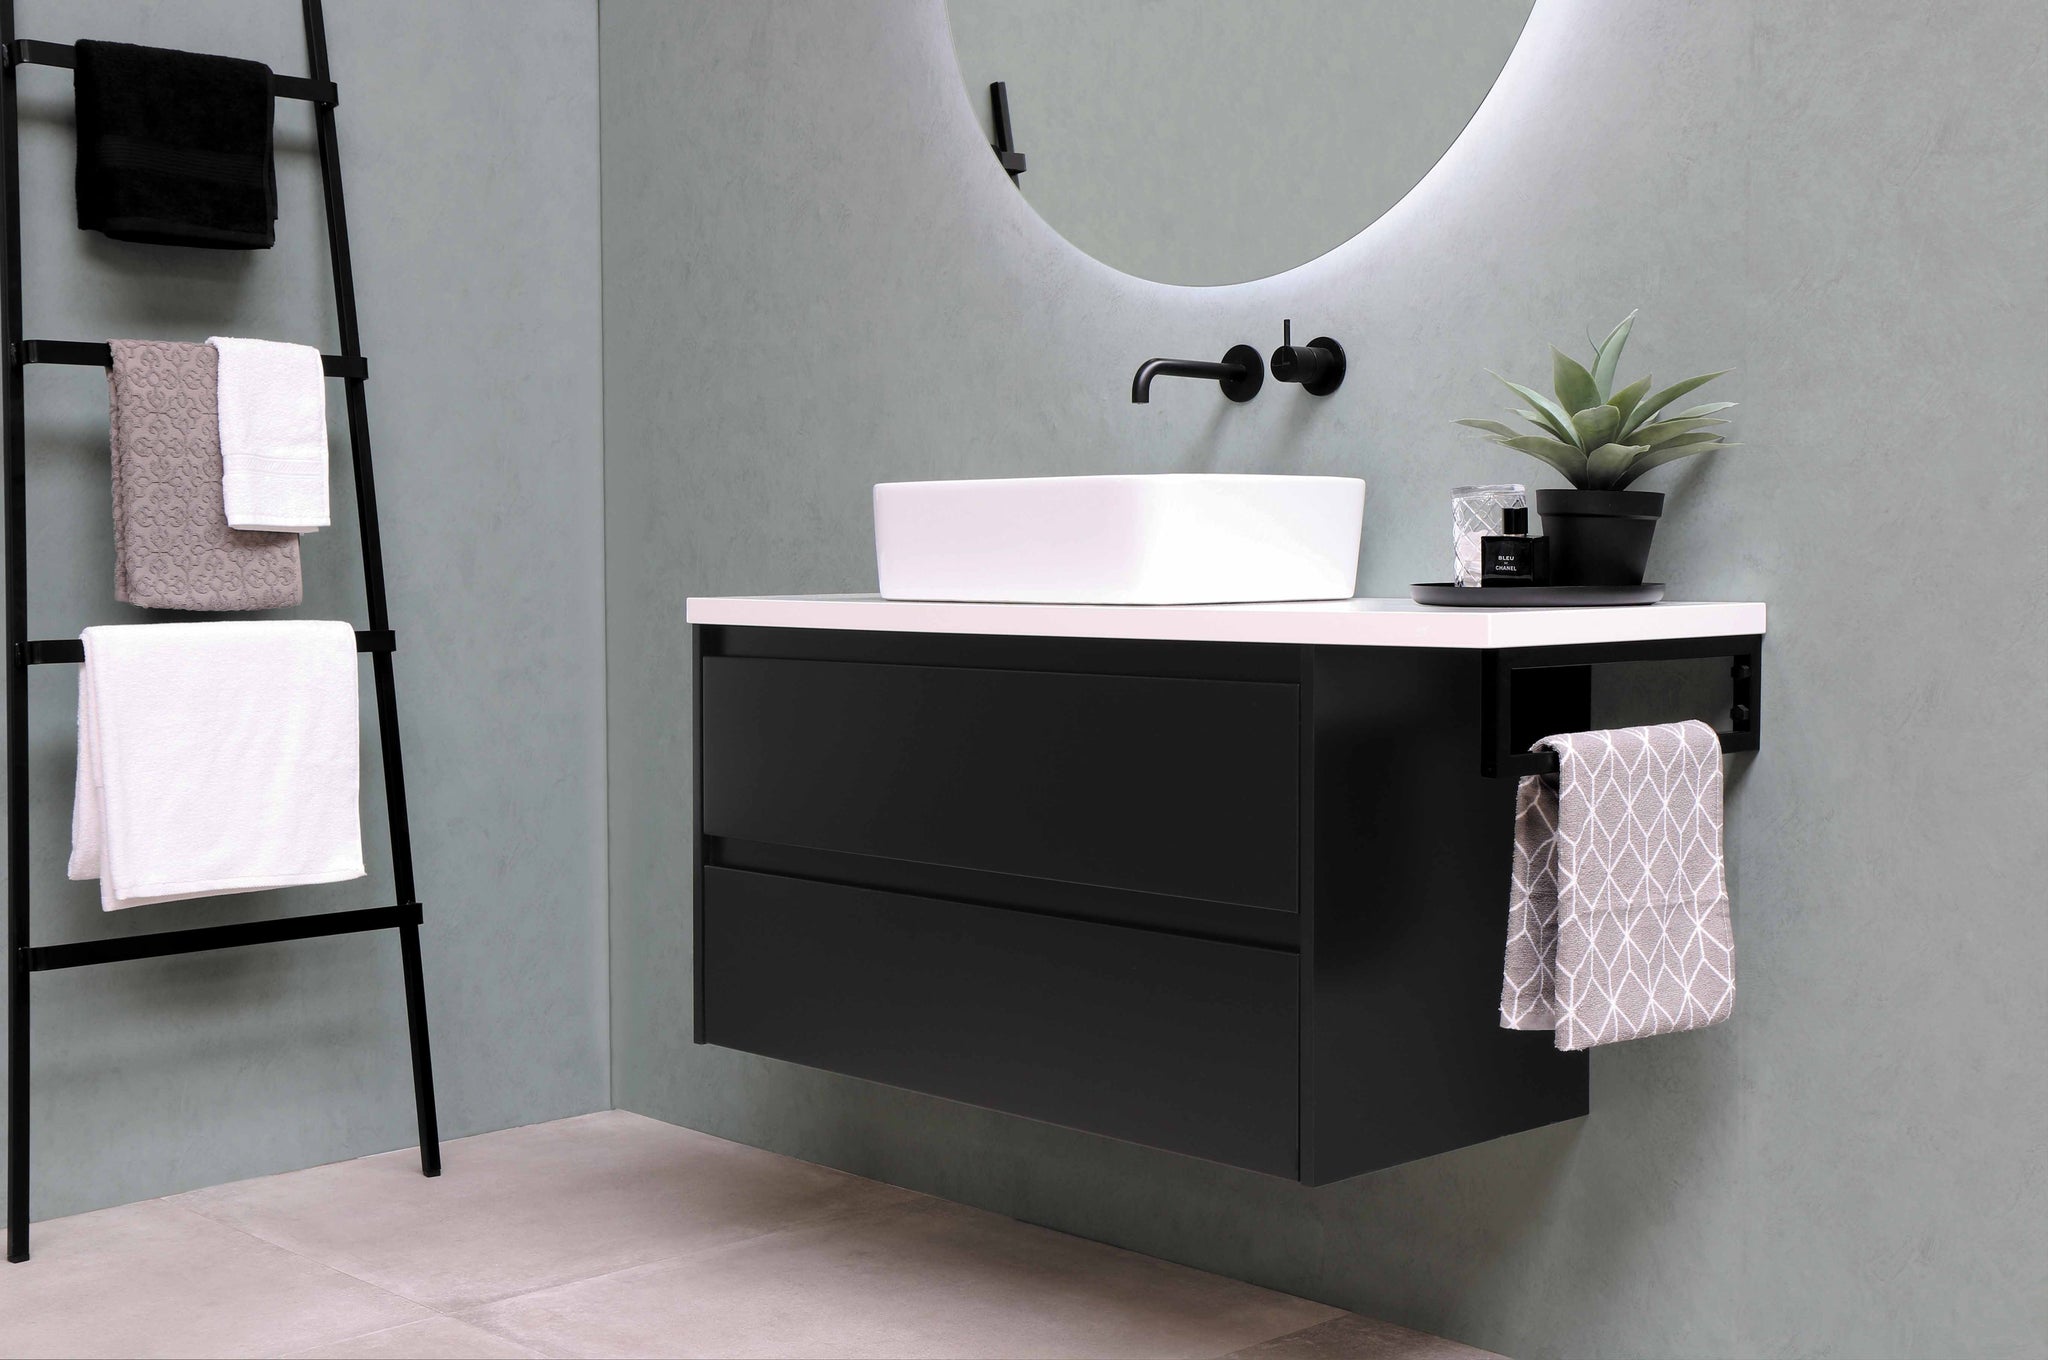 Innovative Storage Solutions for a Clutter-Free Bathroom